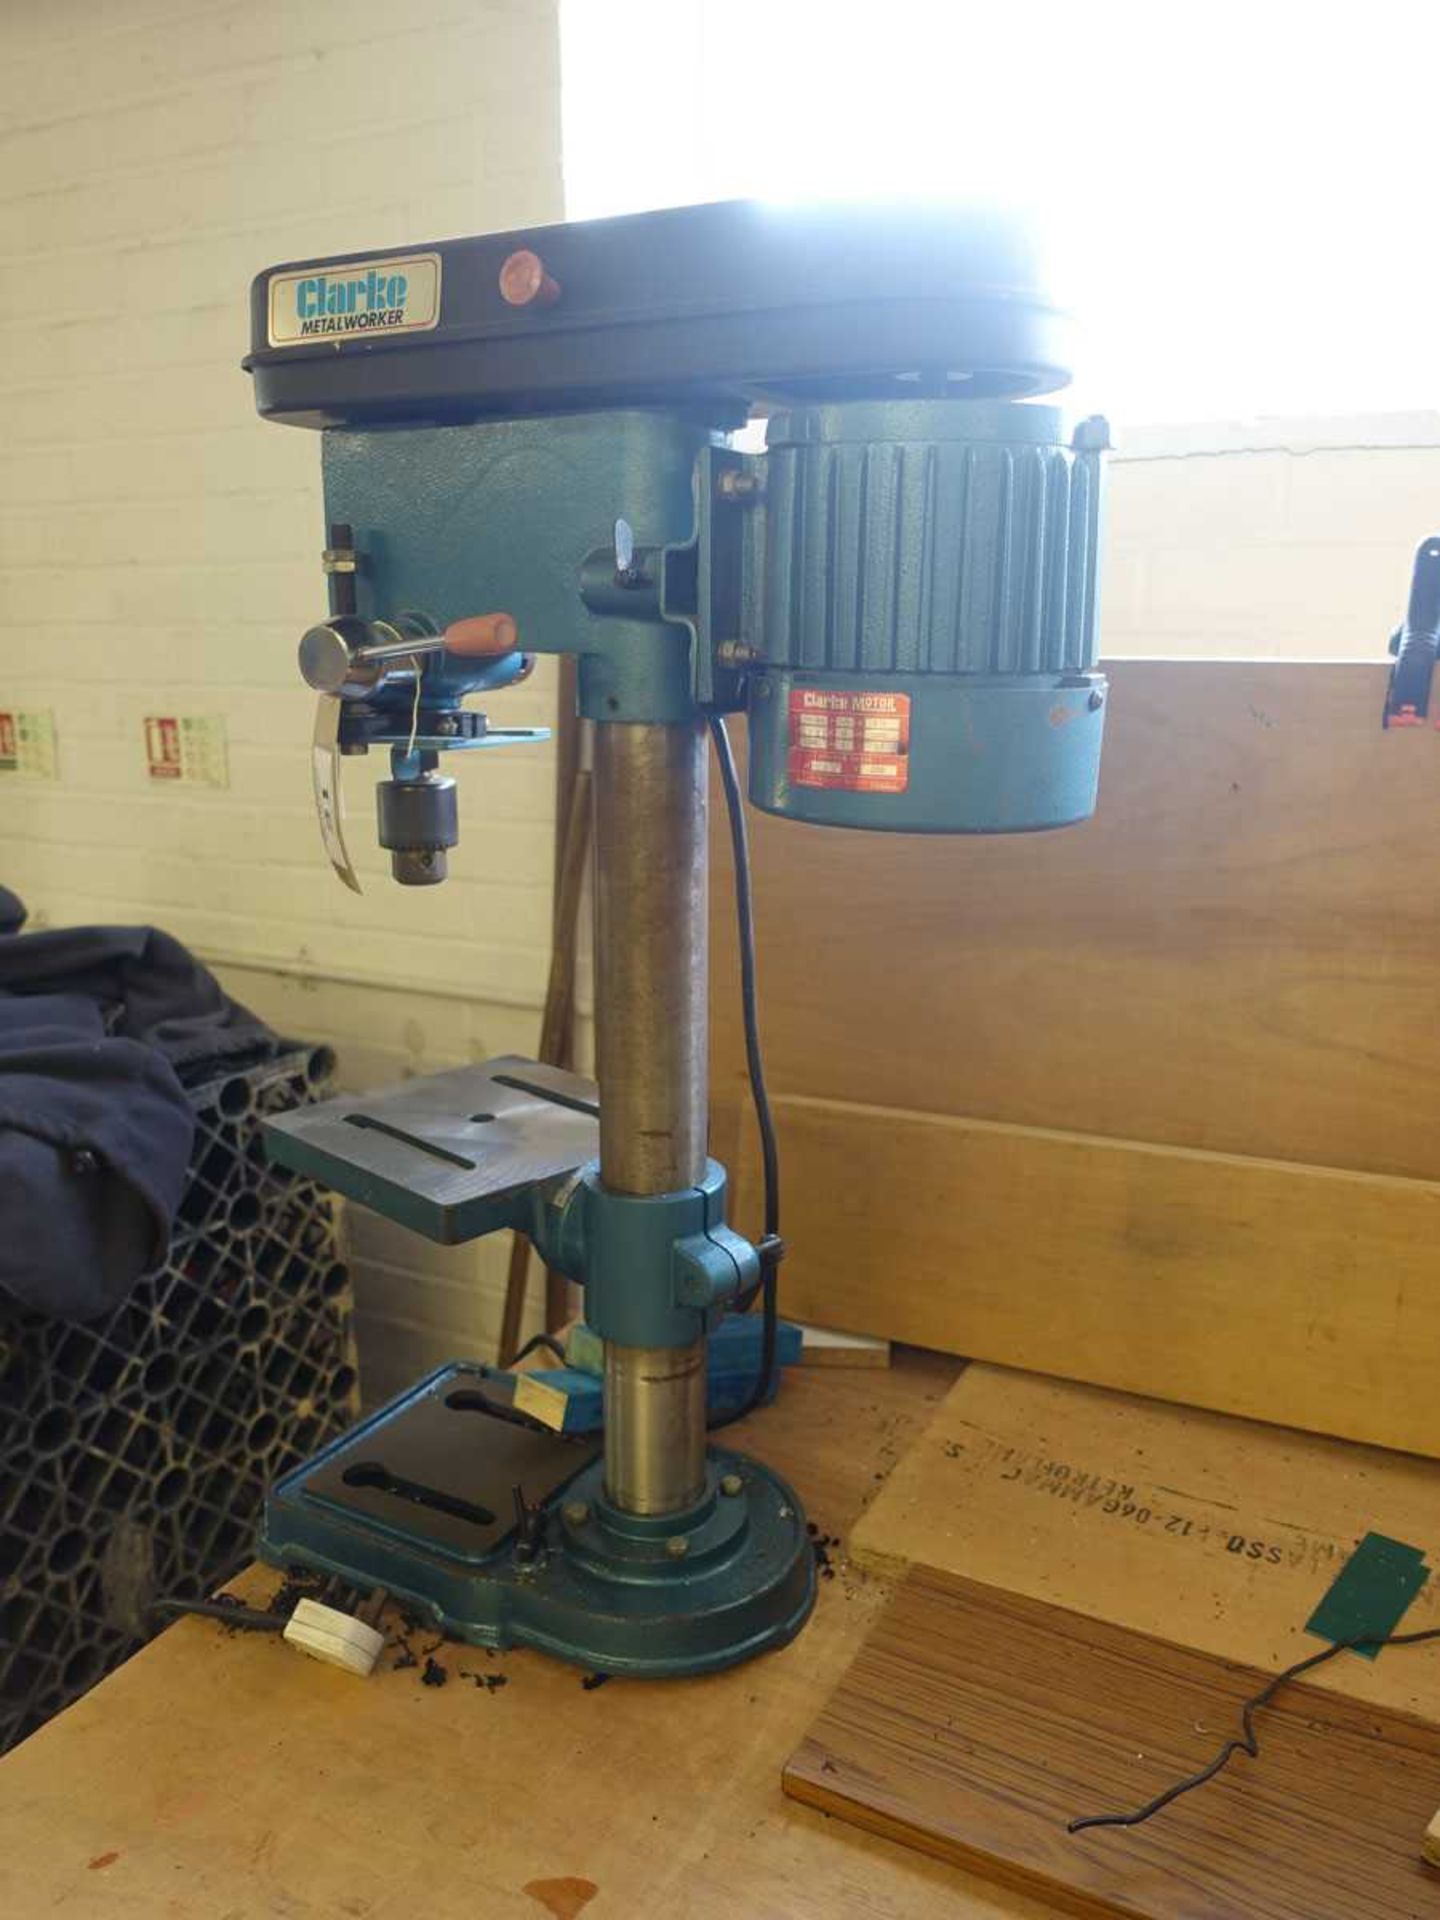 +VAT Clarke Metalworker 1/2" bench drill, model CDP5HP, year1998, single phase electric (On - Image 2 of 2